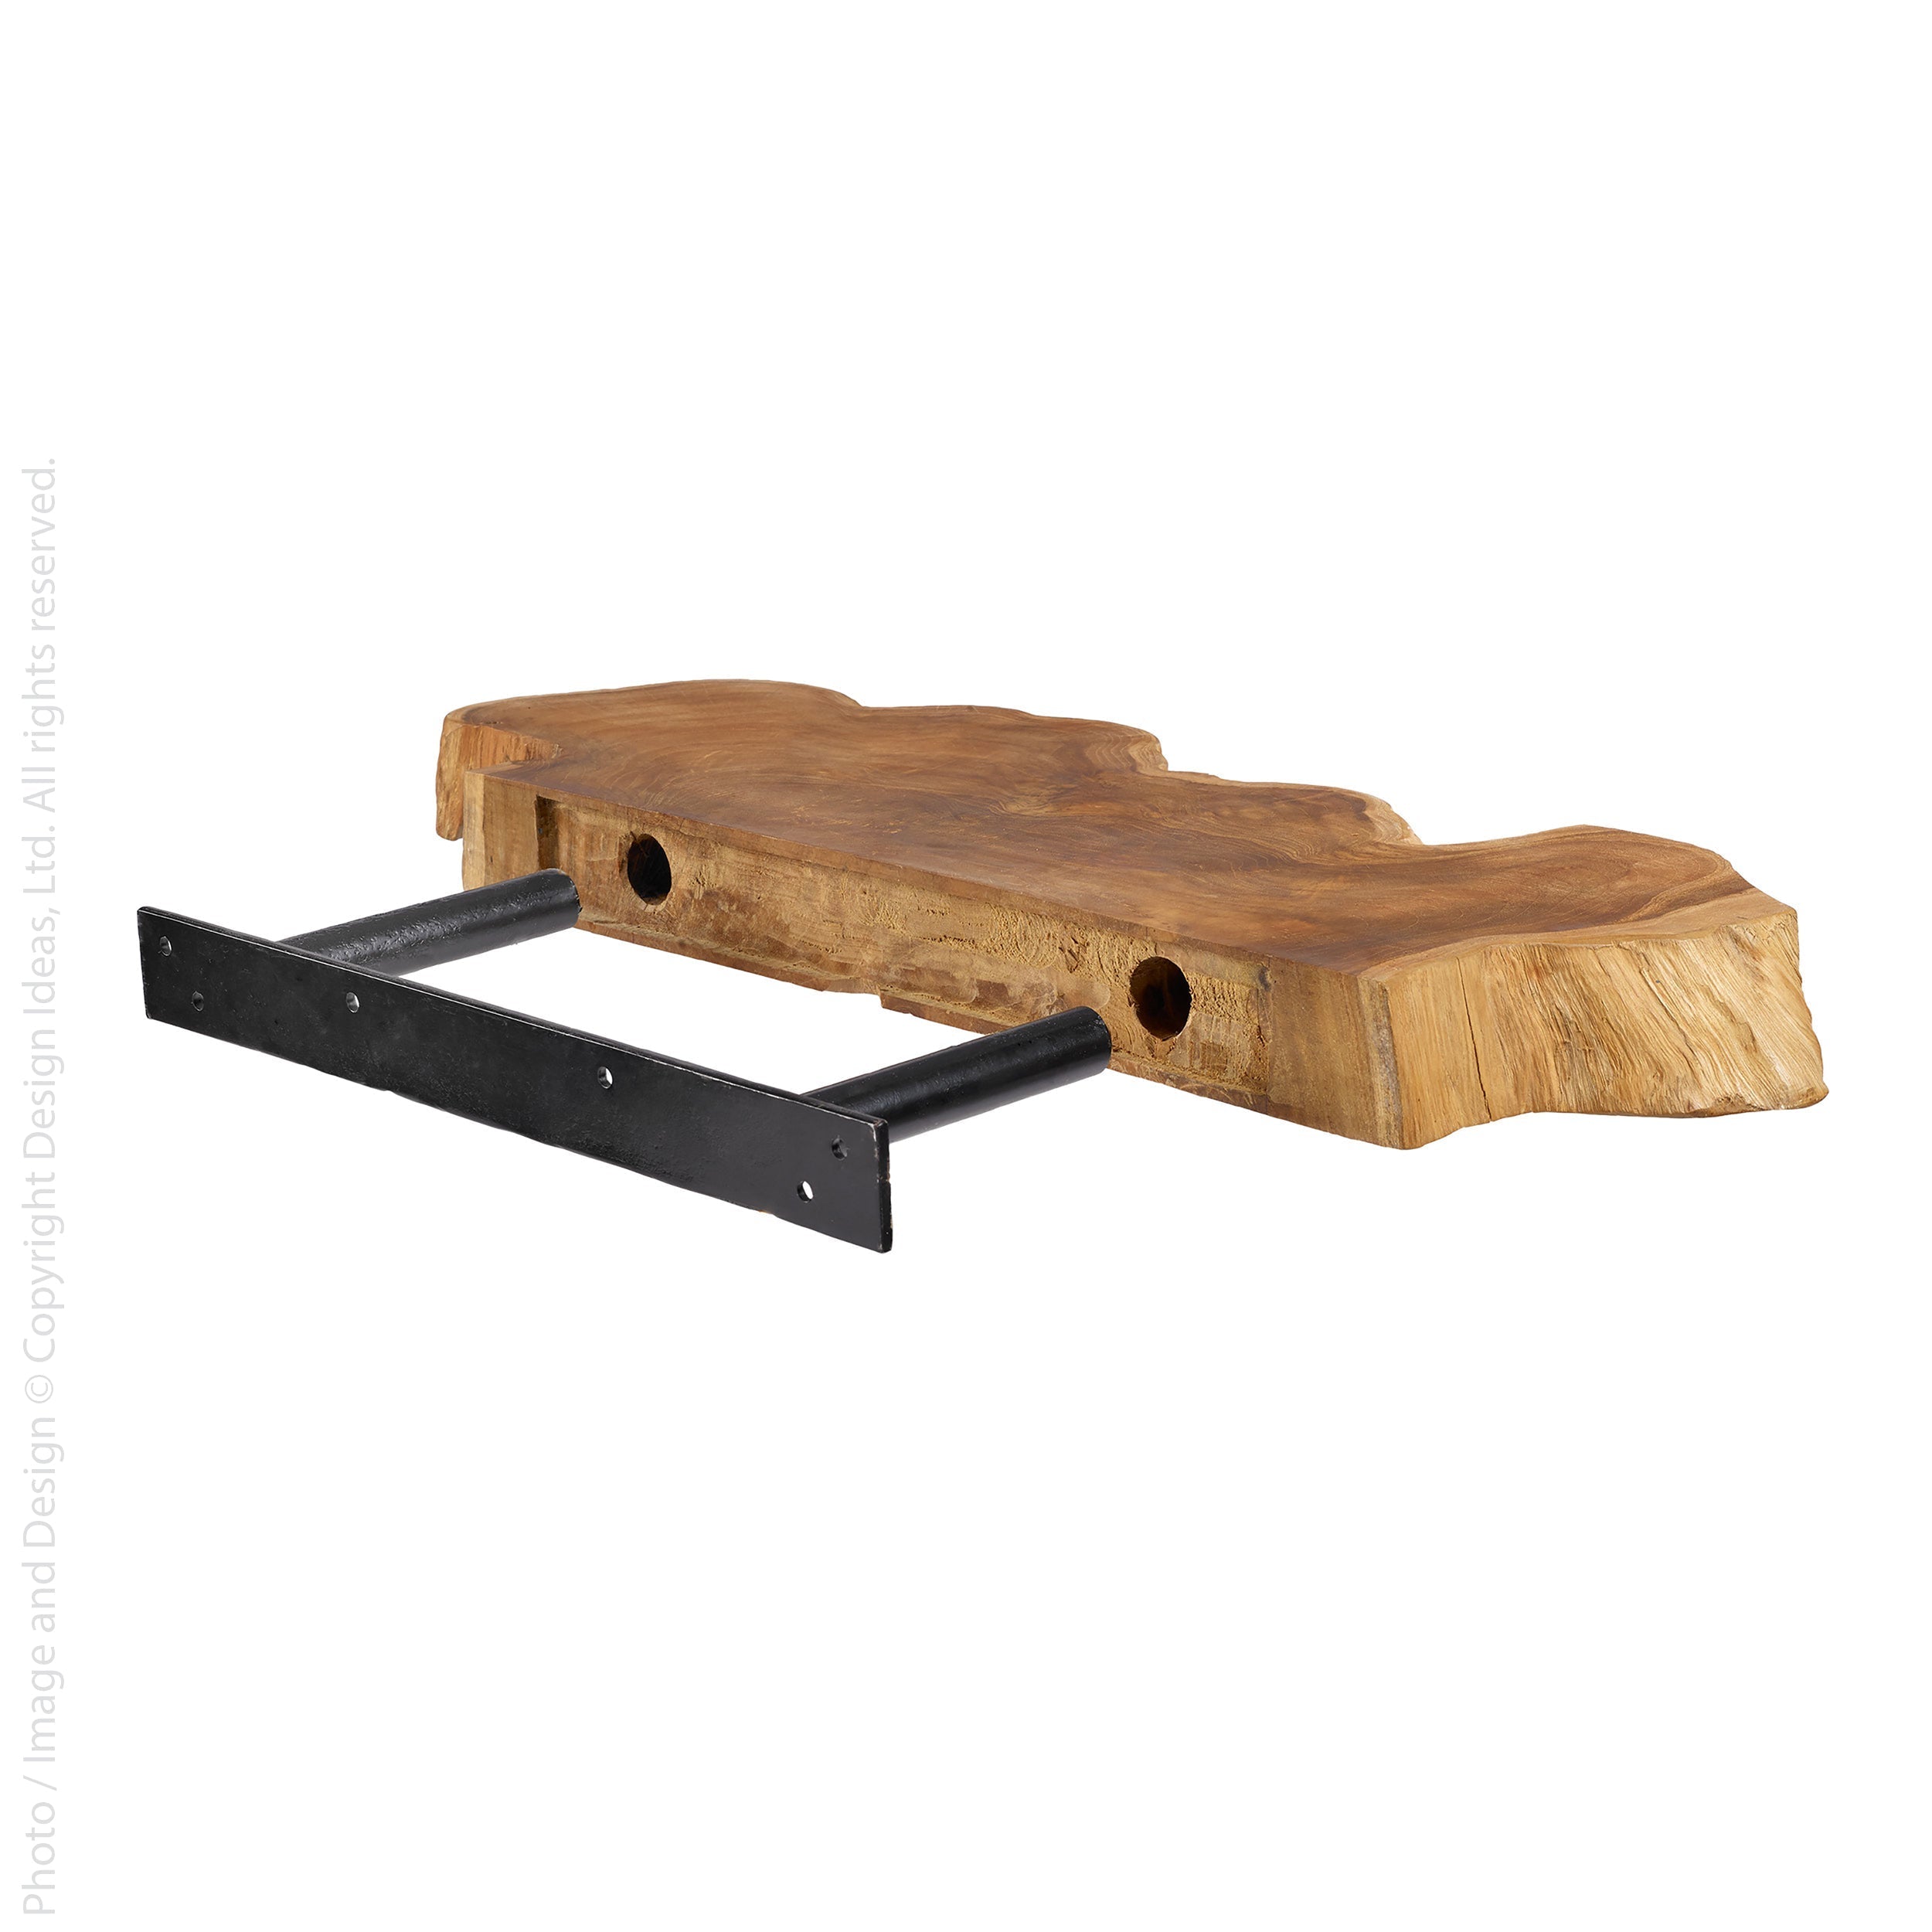 Takara Teak Live Edge Shelf (Large) Natural Color | Image 4 | From the Takara Collection | Exquisitely constructed with natural teak for long lasting use | This shelf is sustainably sourced | Available in natural color | texxture home